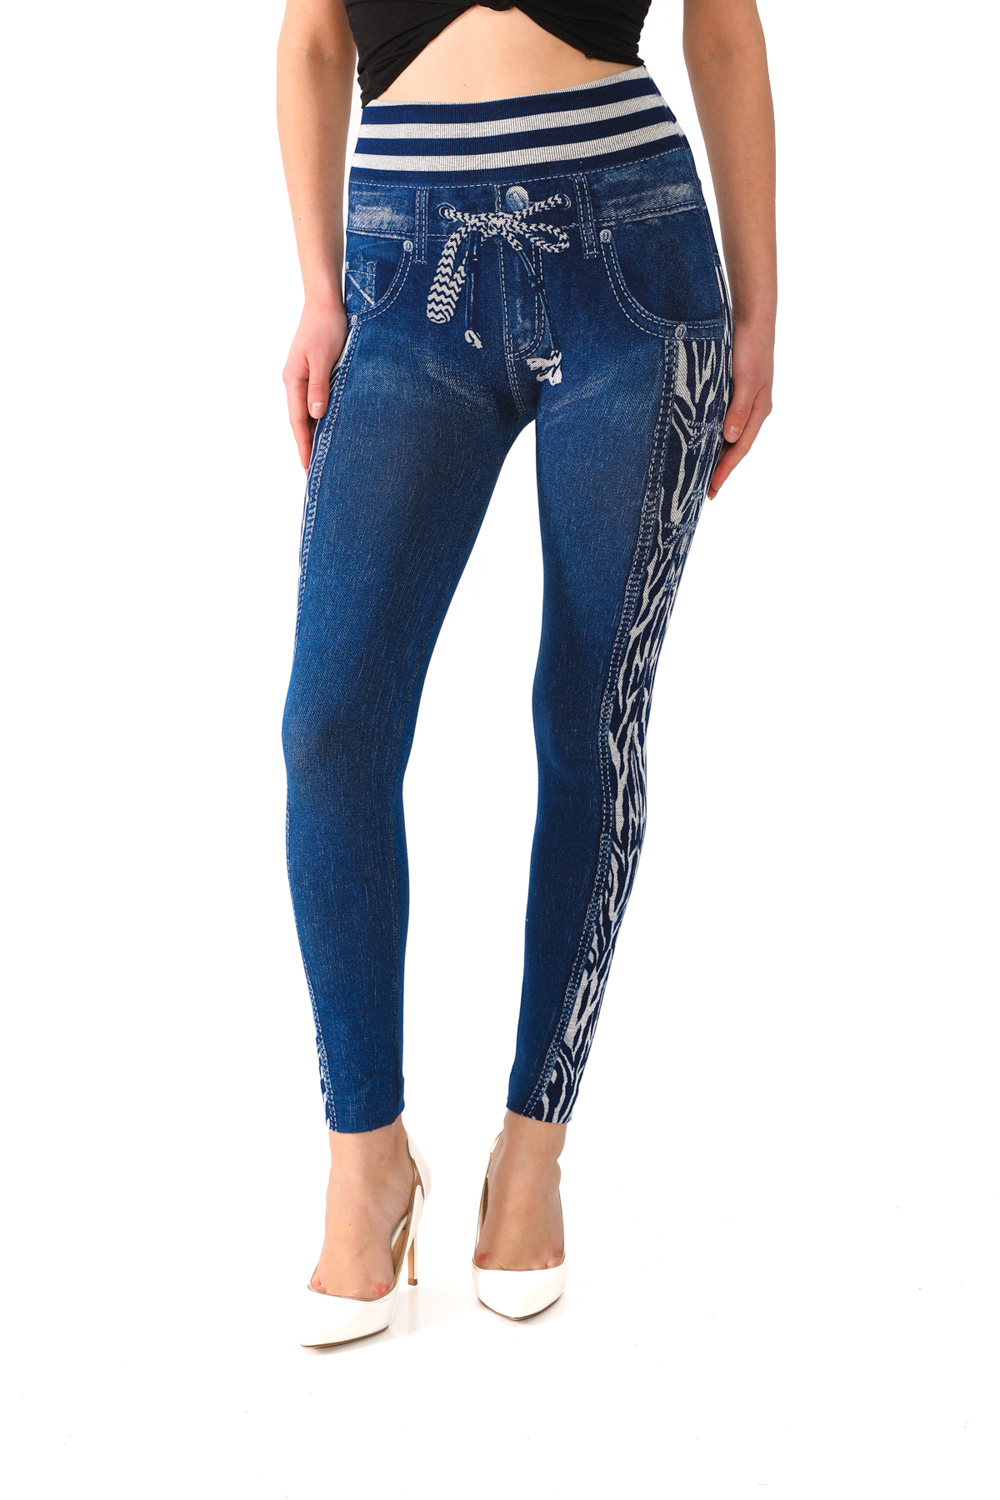 Seamless Jeggings with Tiger Pattern Side Stripes - 7